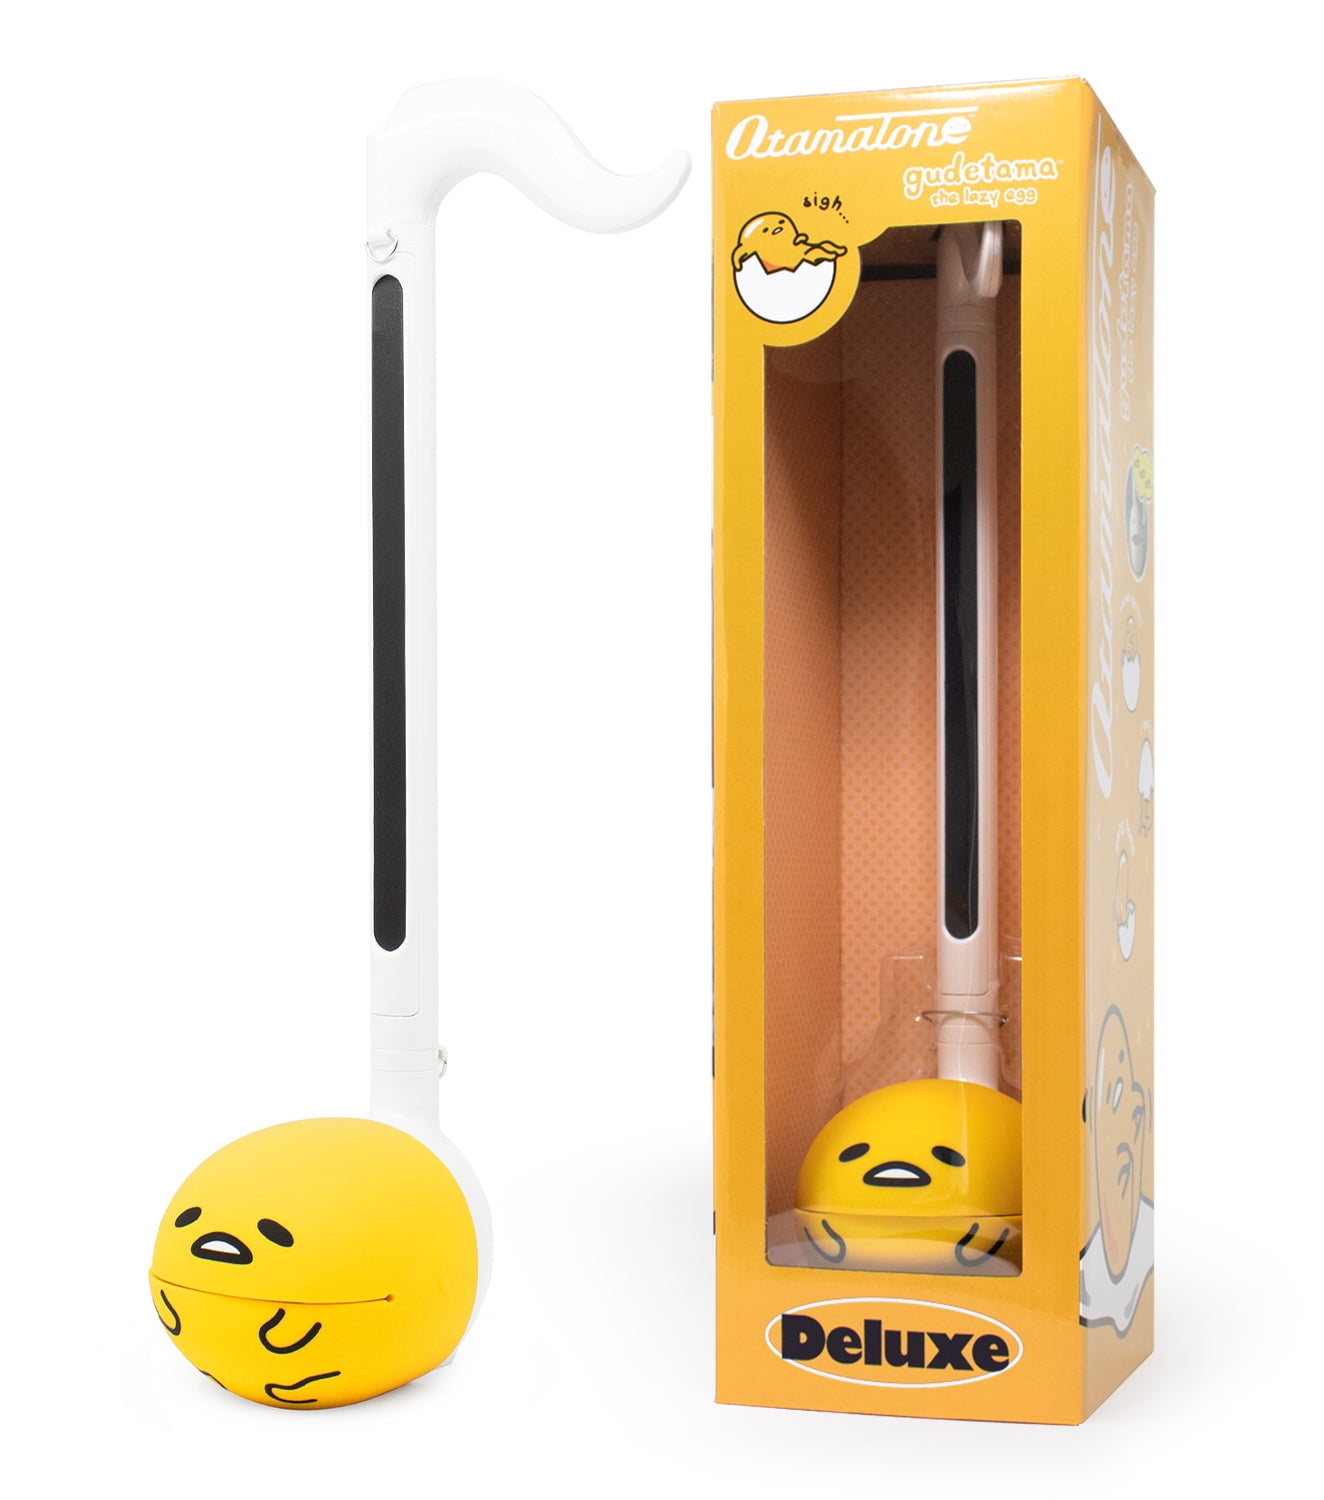 Otamatone Gudetama Fun Japanese Electronic Musical Instrument Toy  Synthesizer Deluxe Size for Children and Adults